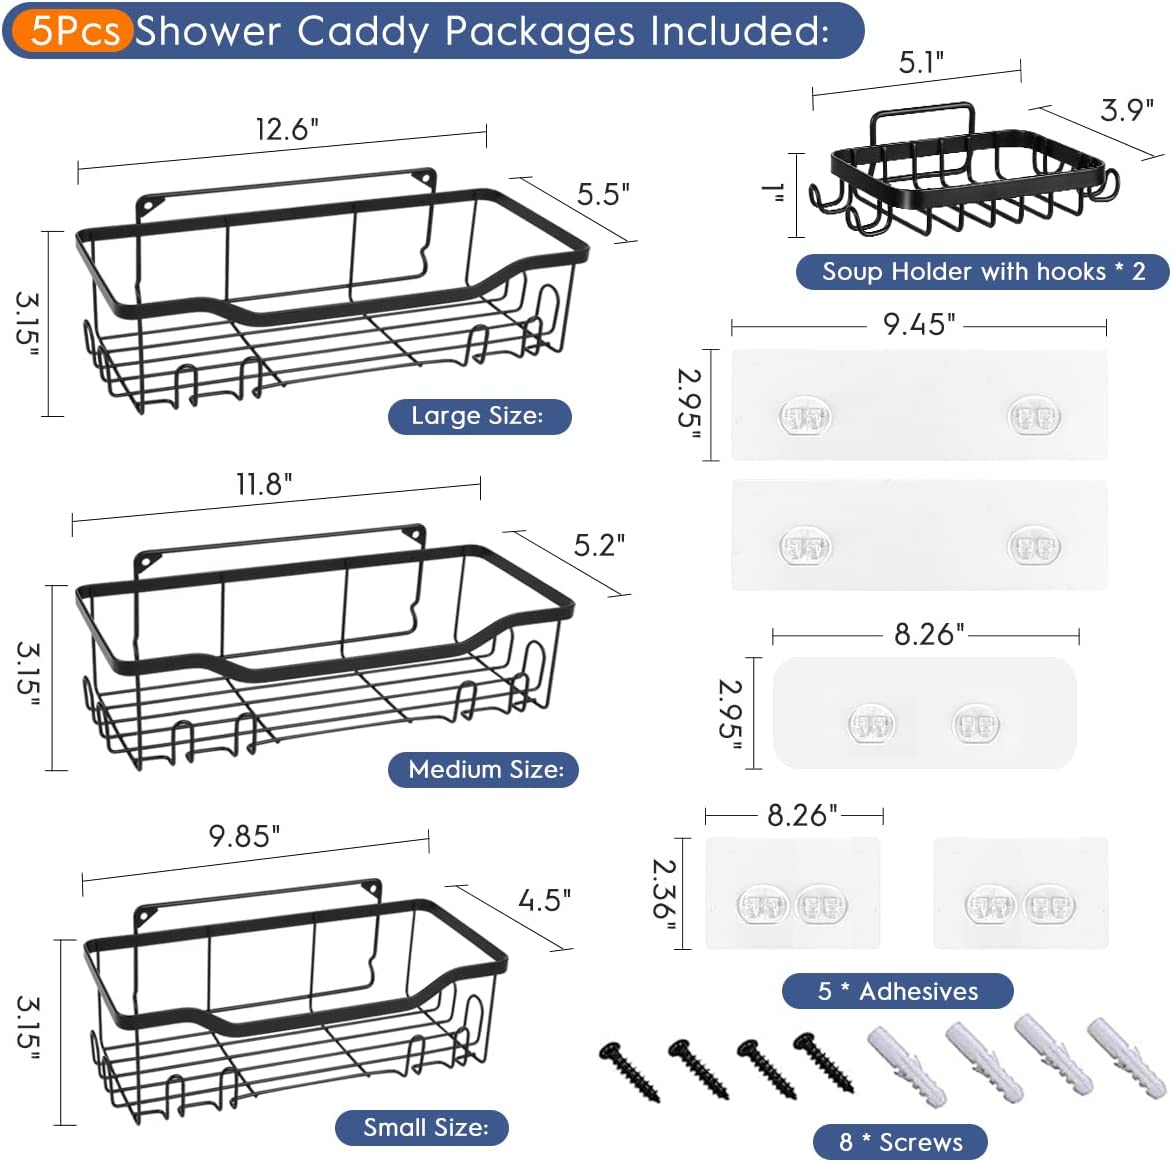 Shower Caddy Sheves, [ 5 Pack ] Adhesive Bathroom Shelf Organizer with Soap Holder, No Drilling Wall Mounted SUS 304 Stainless Steel Shower Wall Shelves, Rustproof Storage Basket Rack for Home Bathroom Kitchen Toilet (Matte Black)